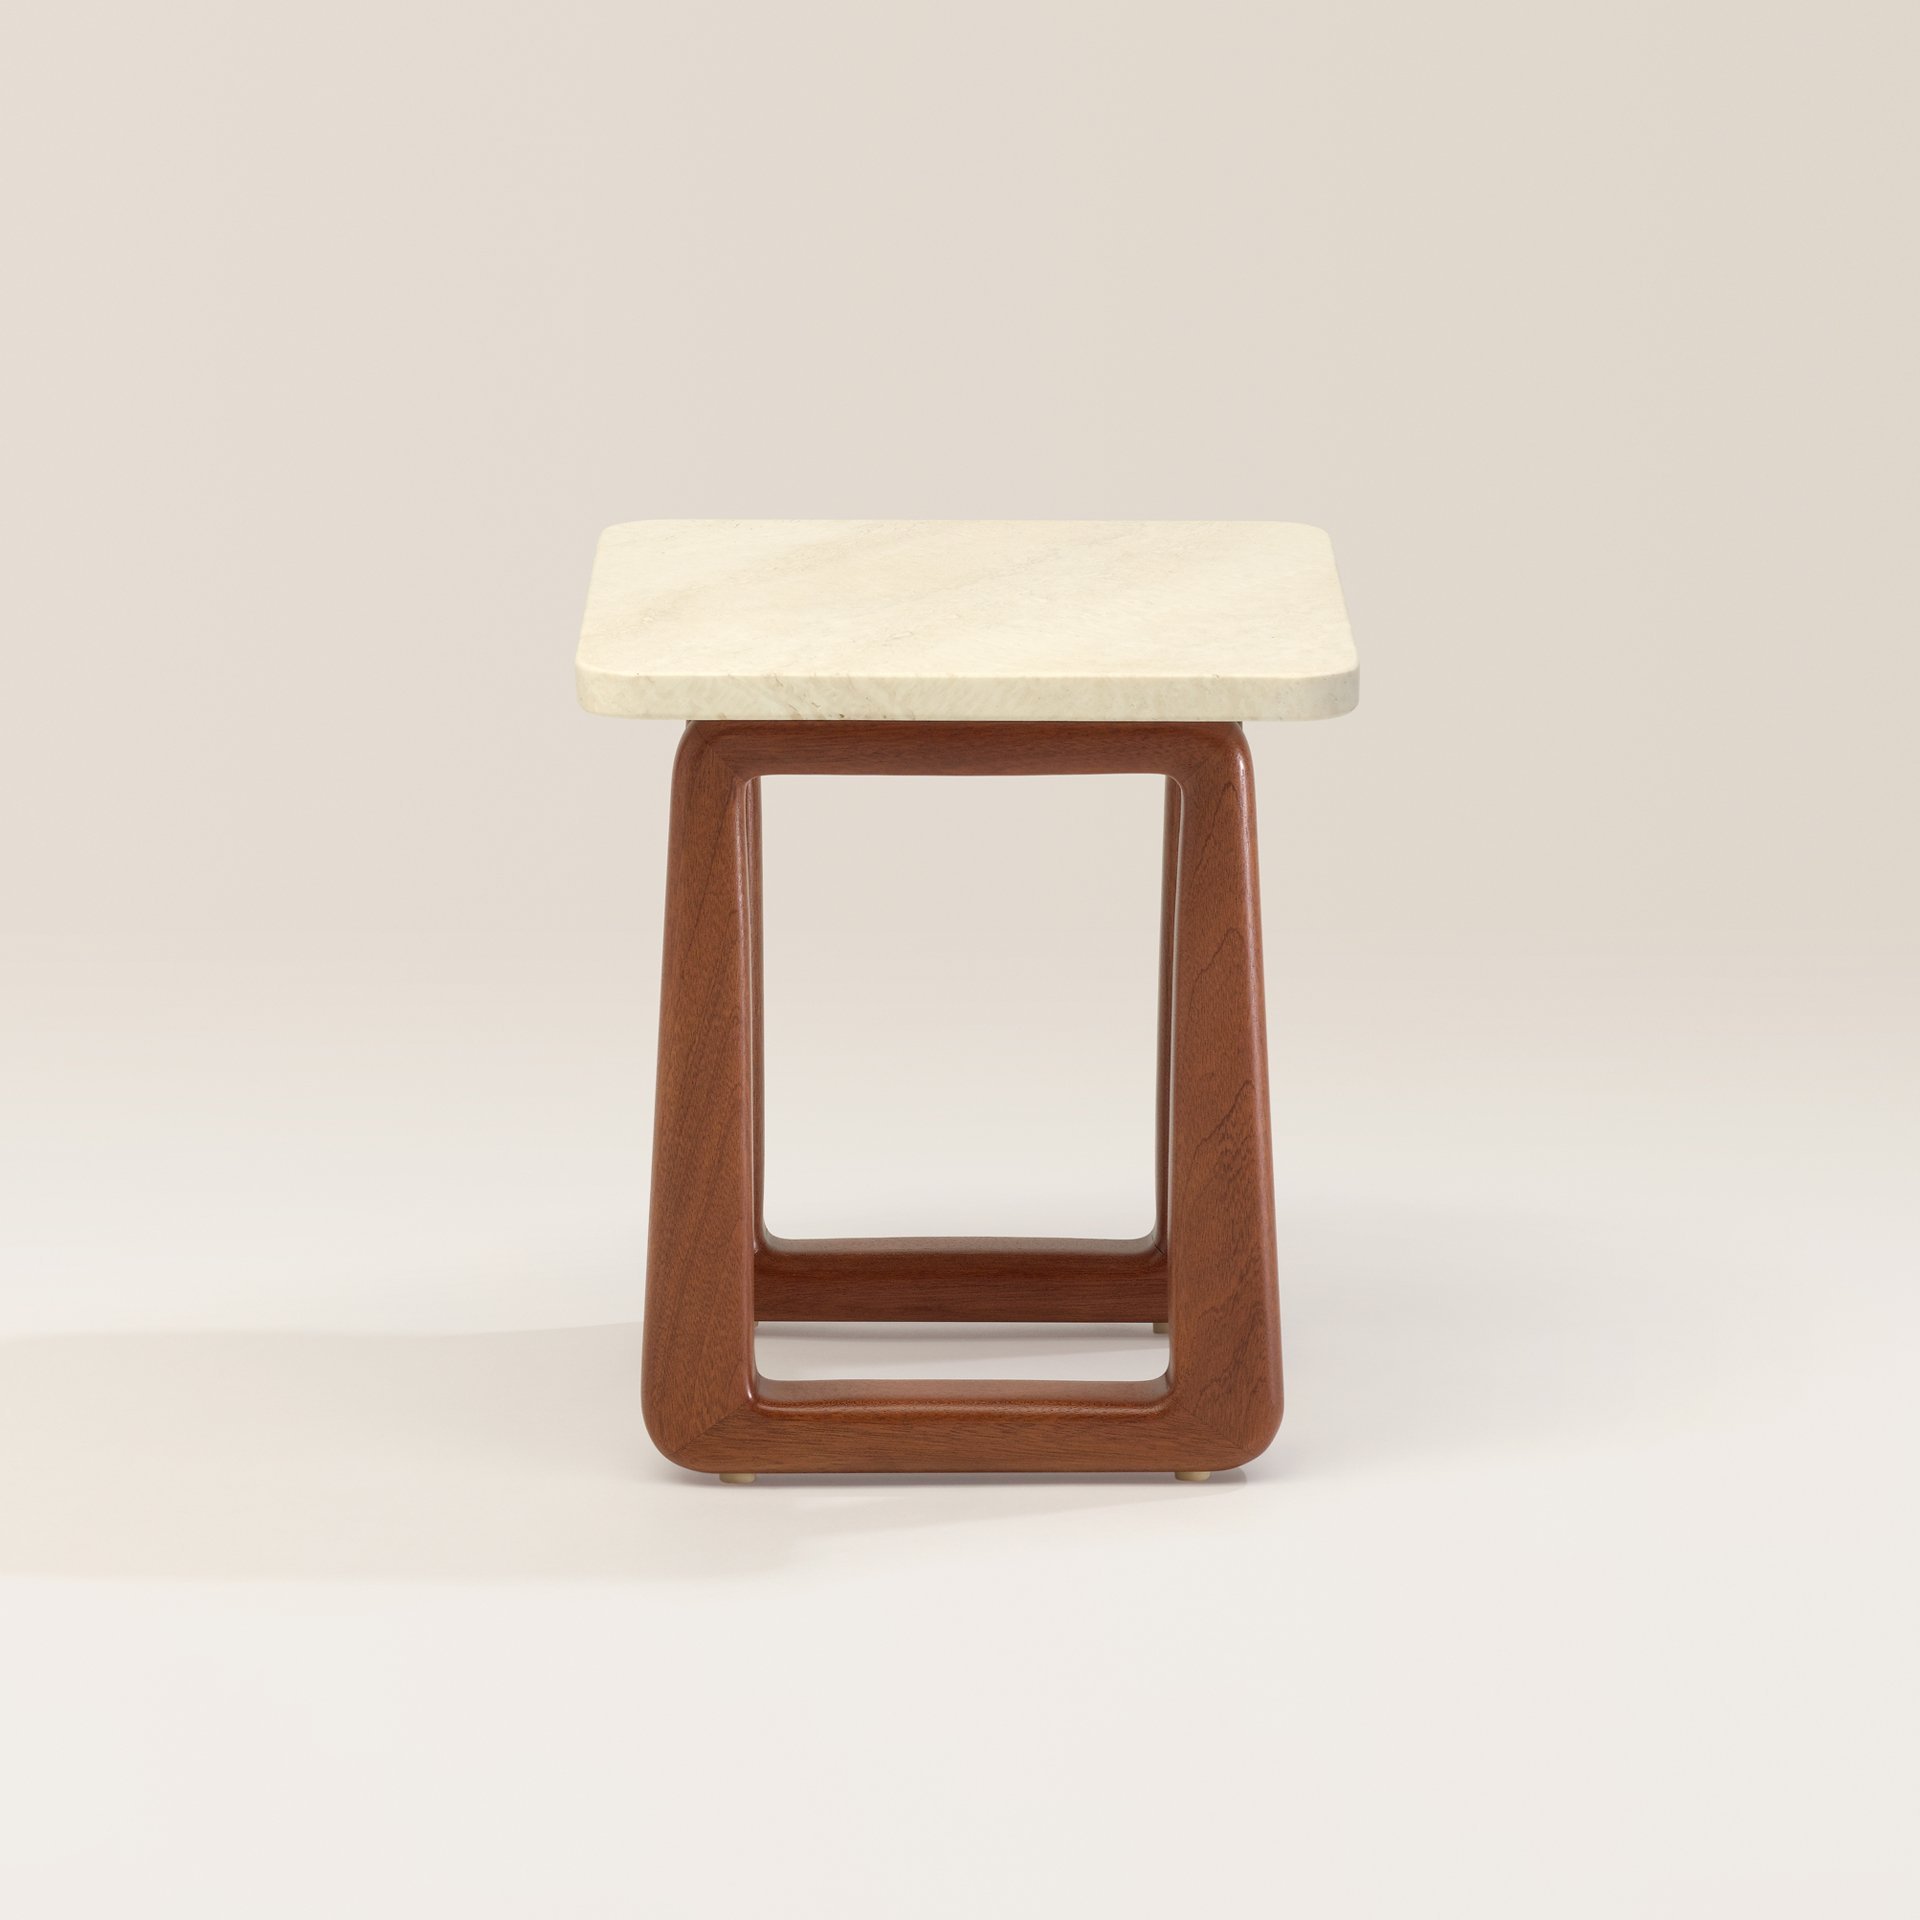 Loro Piana Interiors The Delight chairs by Exteta low side table